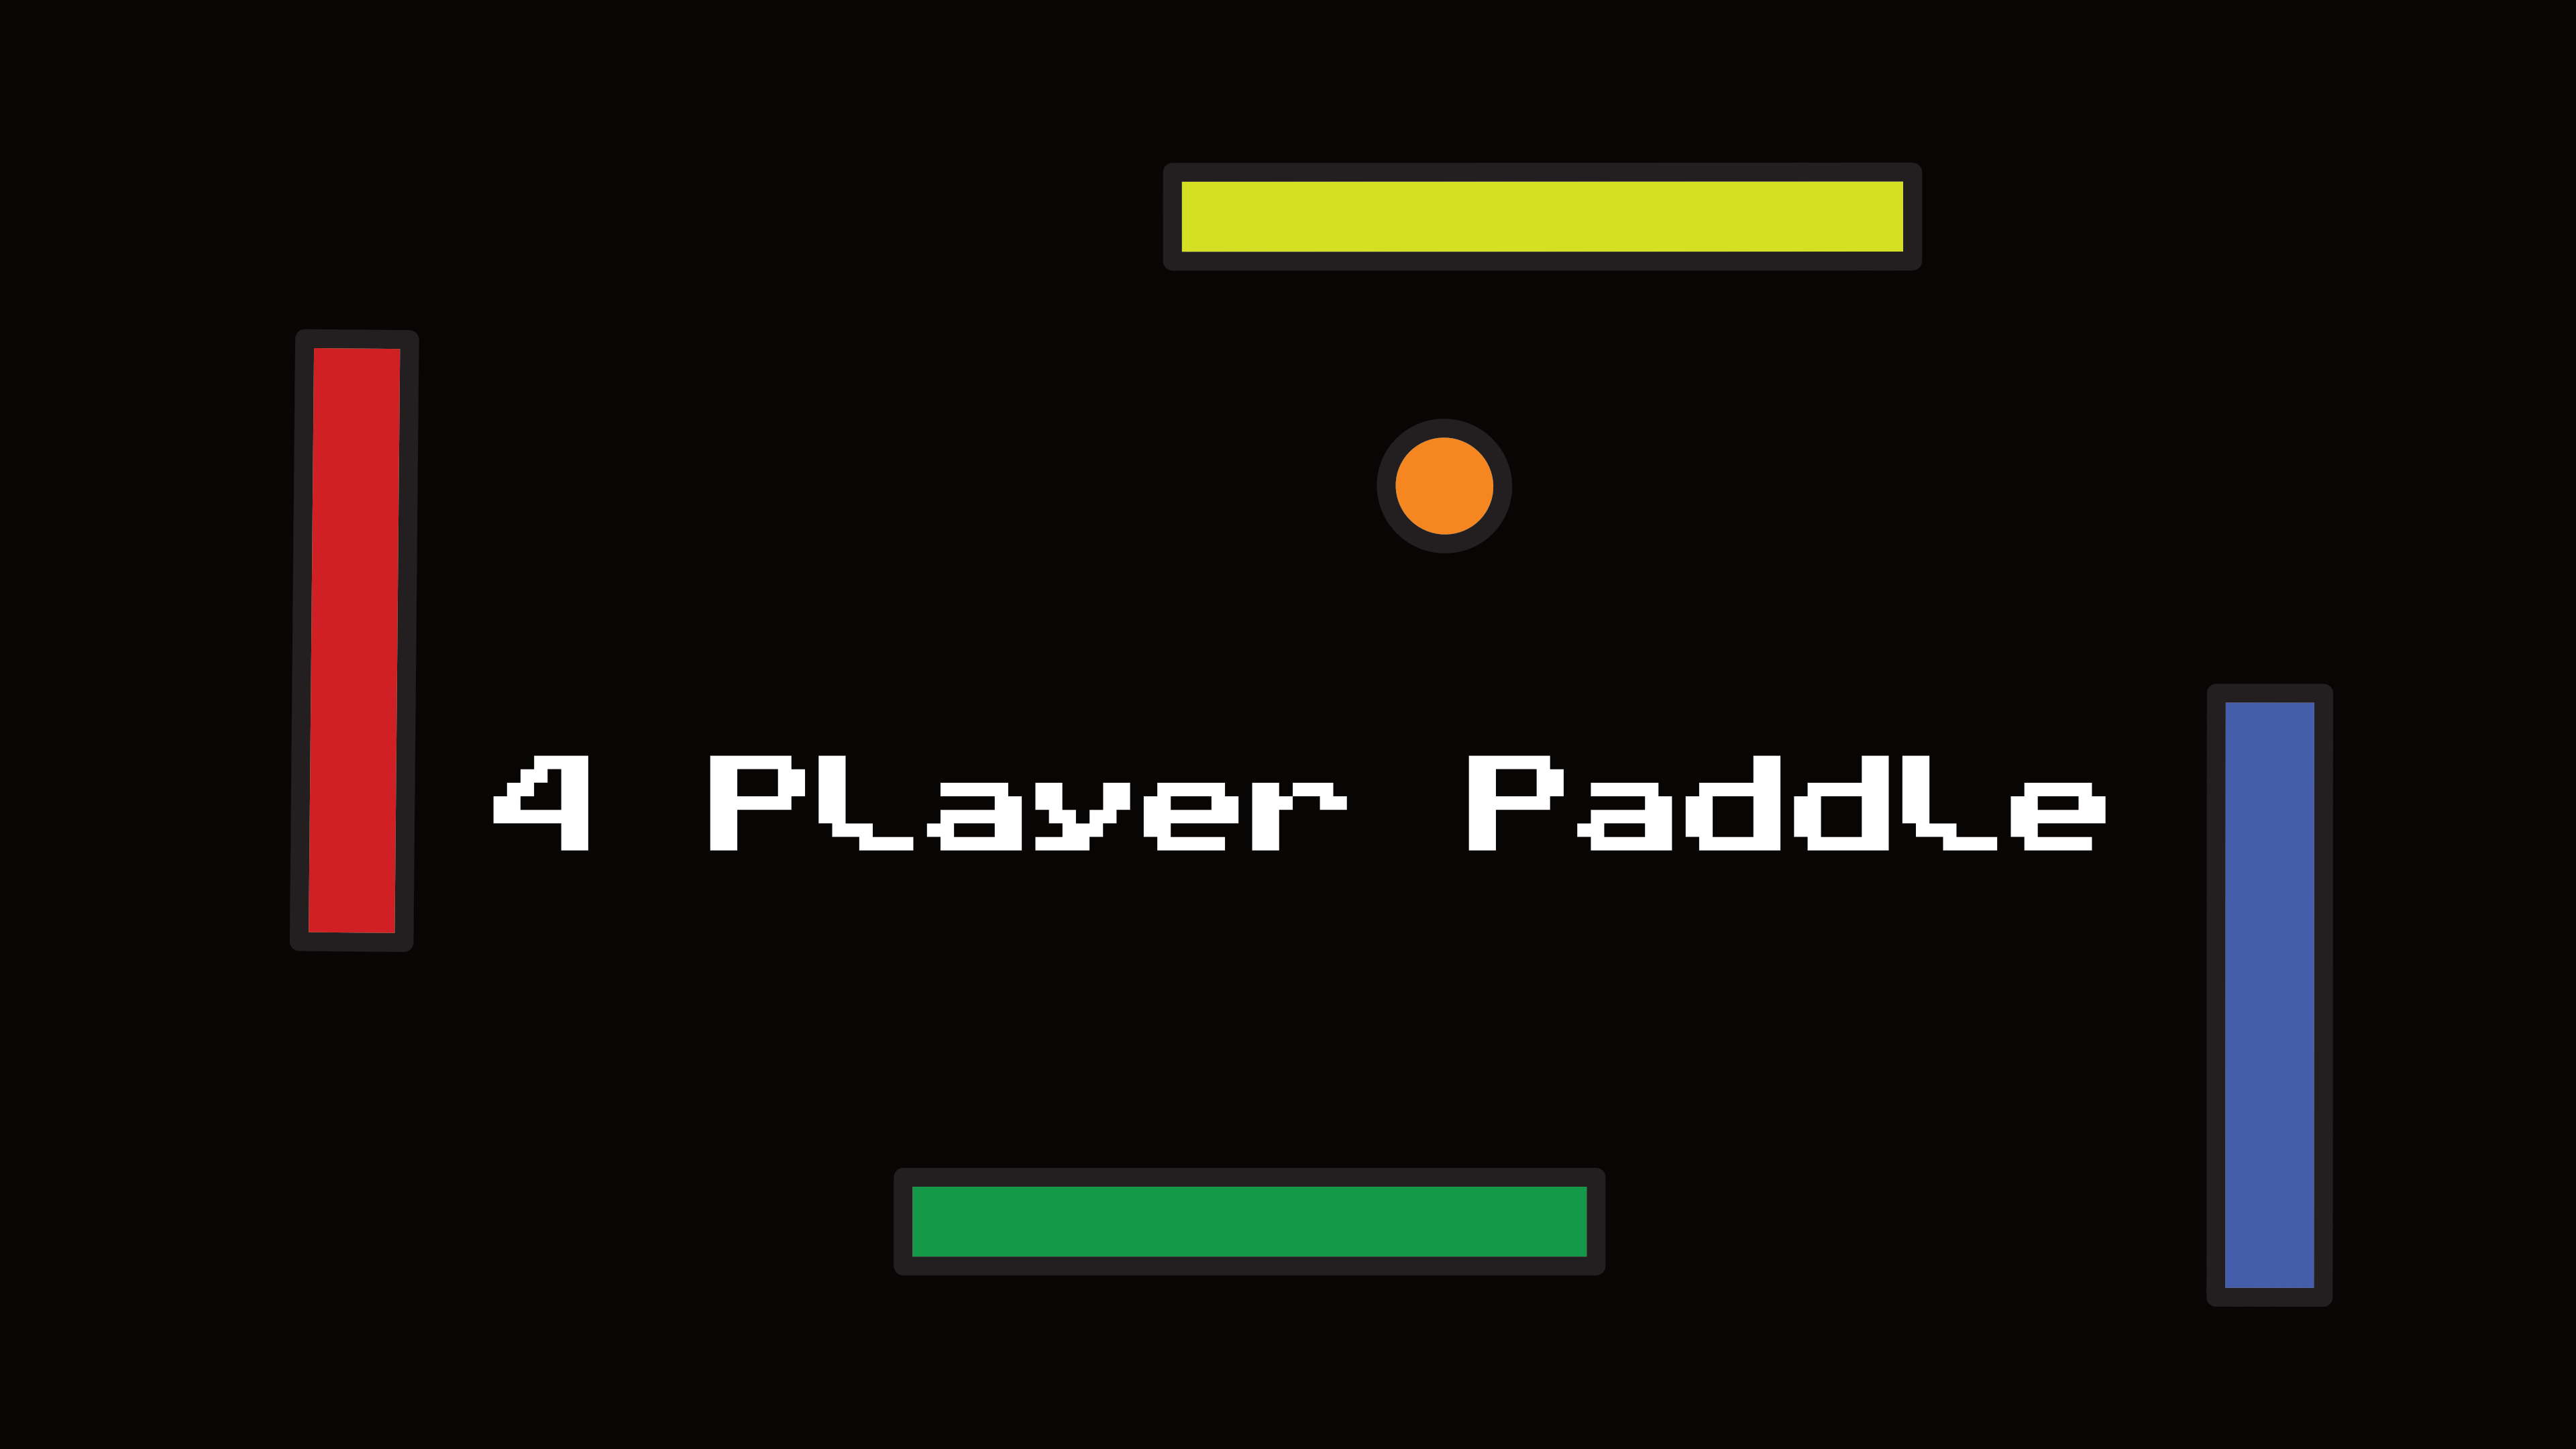 4 Player Paddle